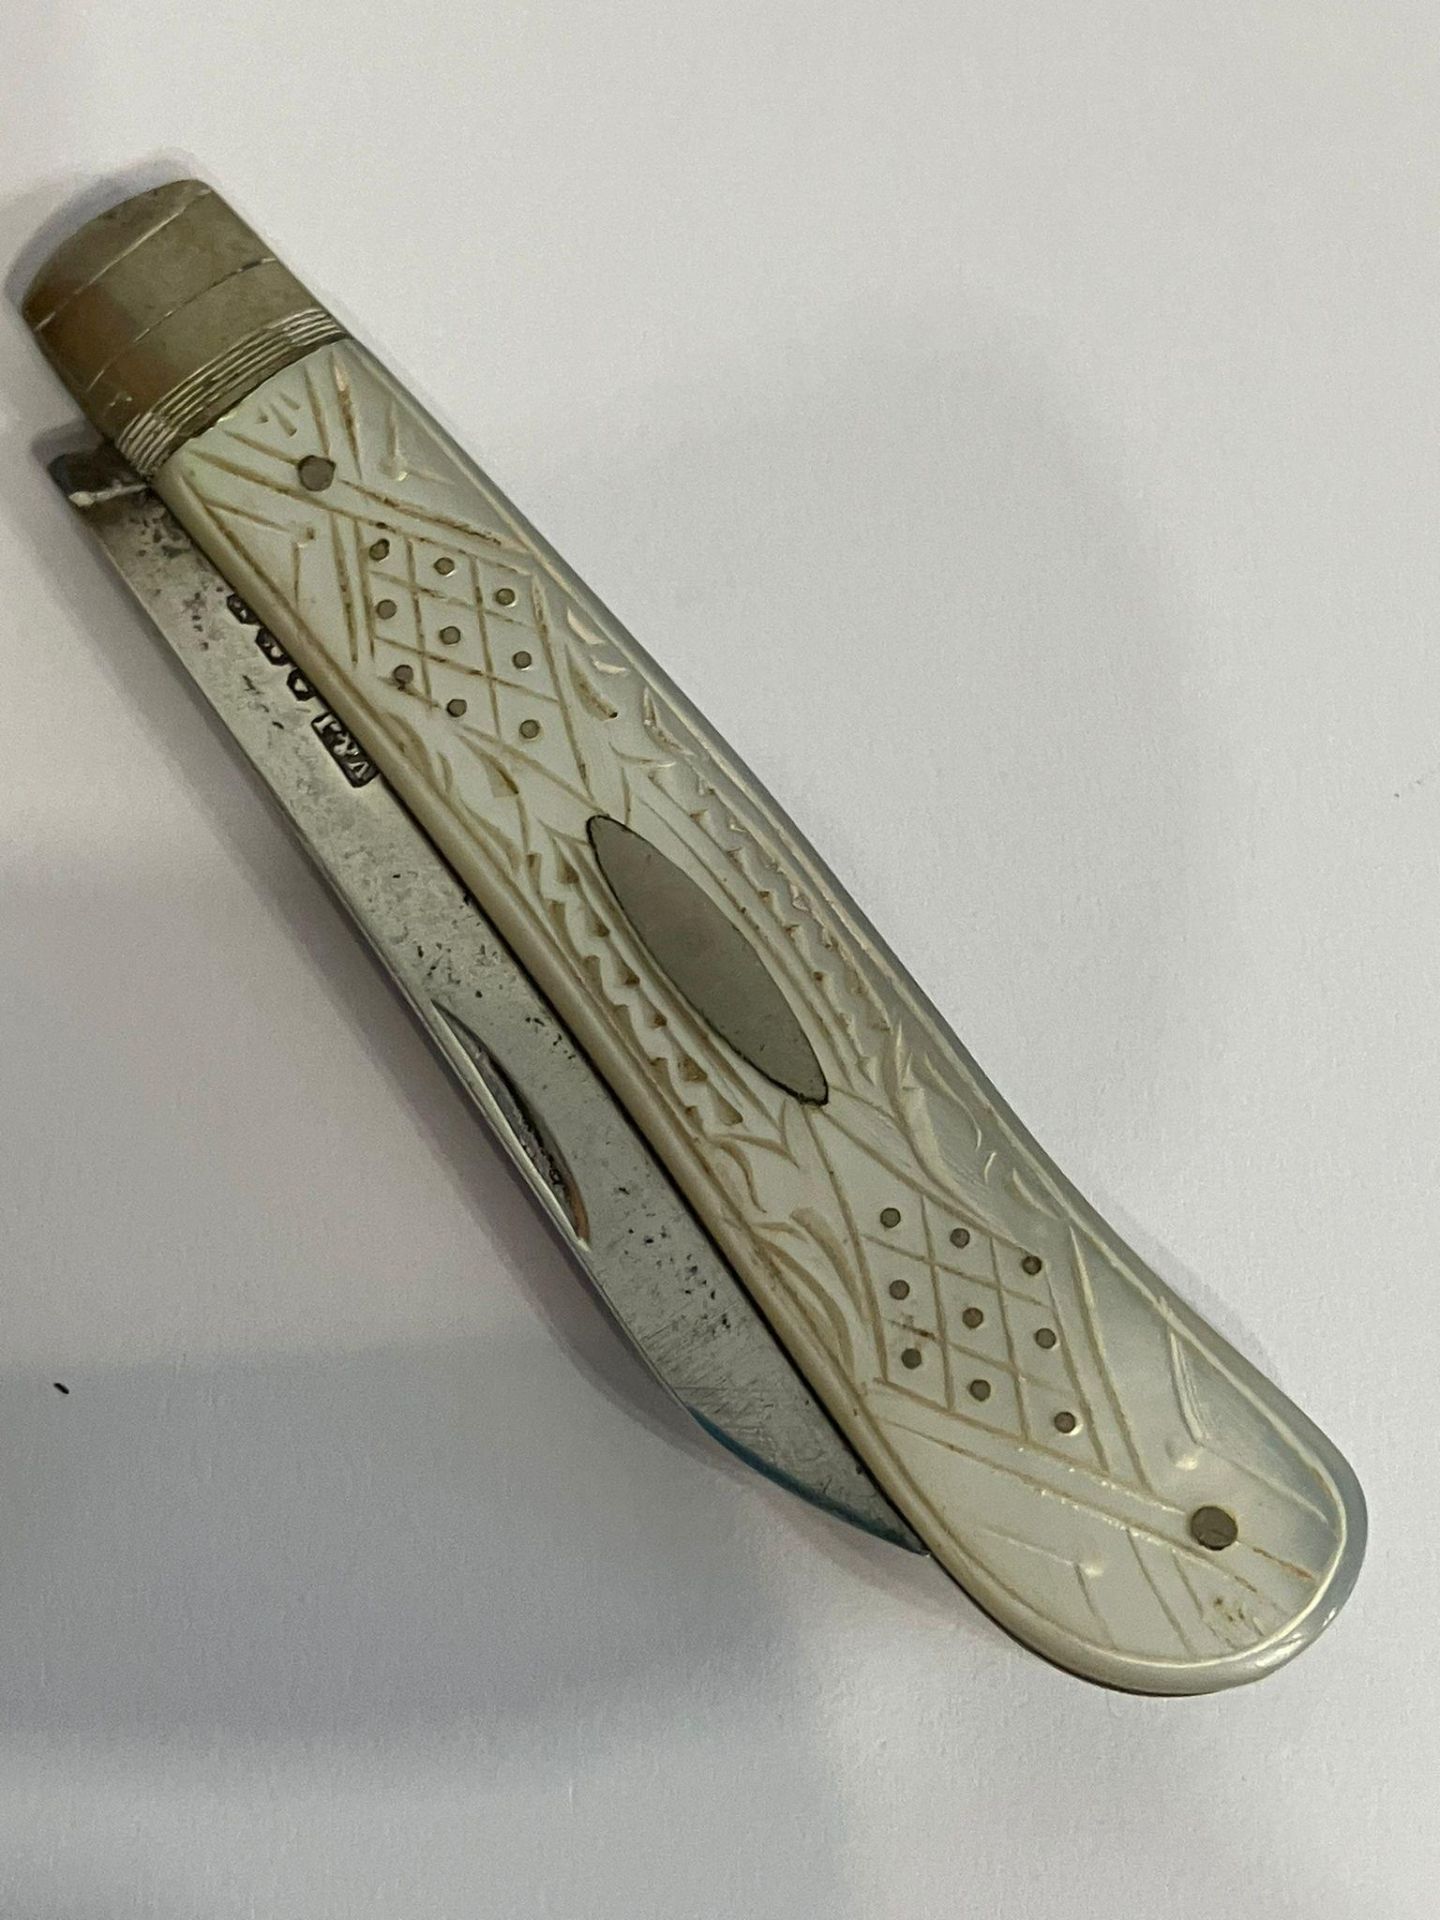 Antique SILVER BLADED FRUIT KNIFE With beautifully decorated mother of pearl handle. Having clear